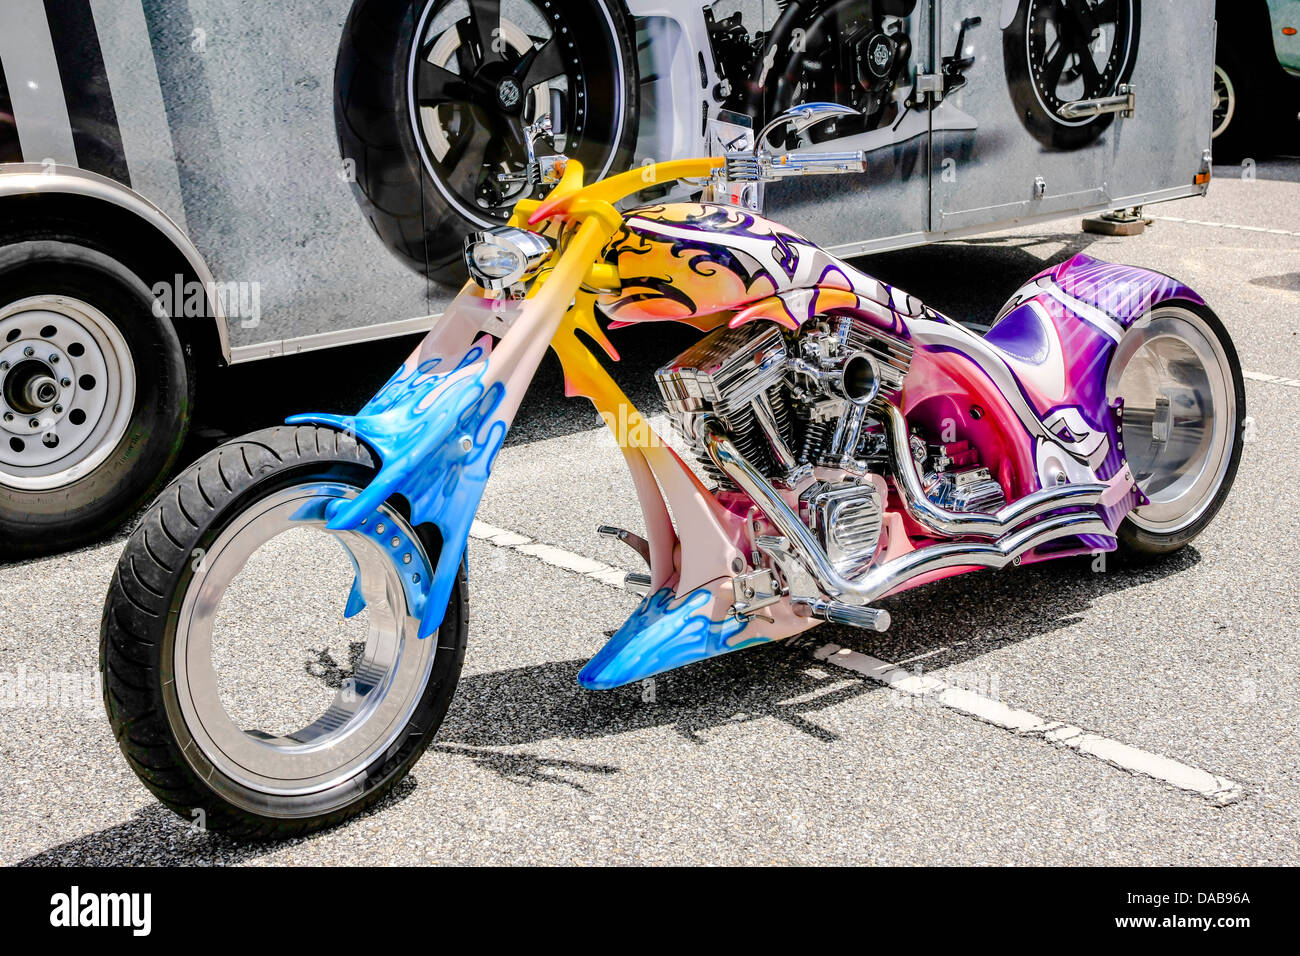 A concept motorcycle on show at a local event in Sarasota FL Stock Photo